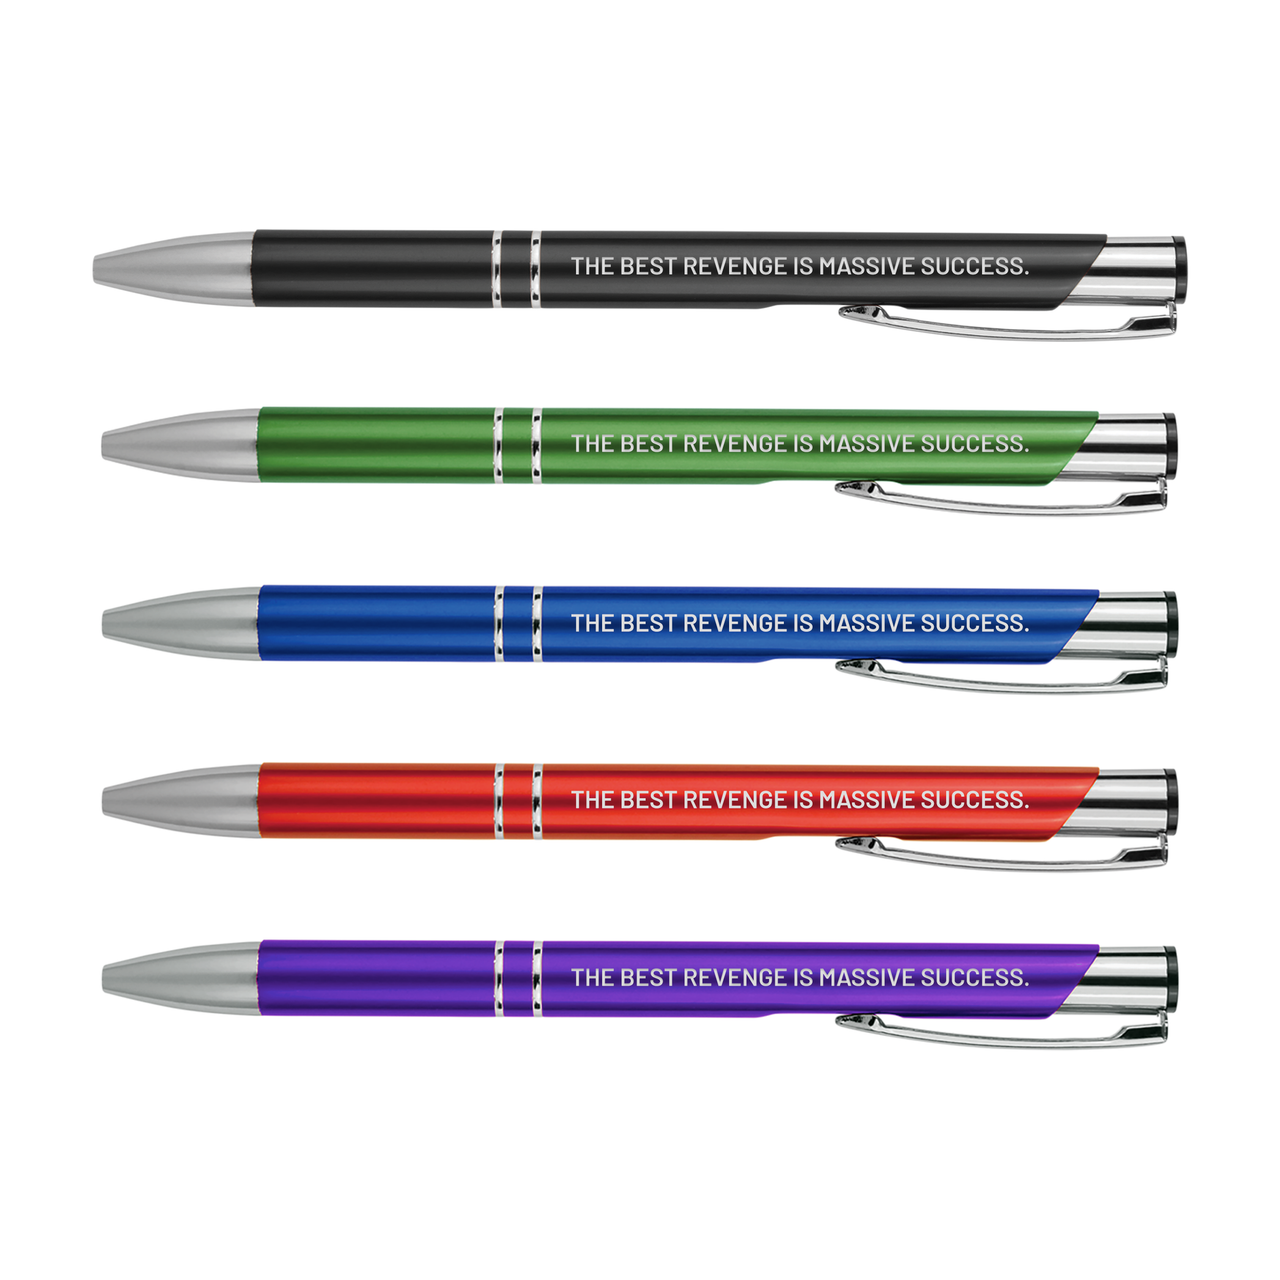 The Best Revenge Is Massive Success Metal Pens | Motivational Writing Tools Office Supplies Coworker Gifts Stocking Stuffer Baum Designs